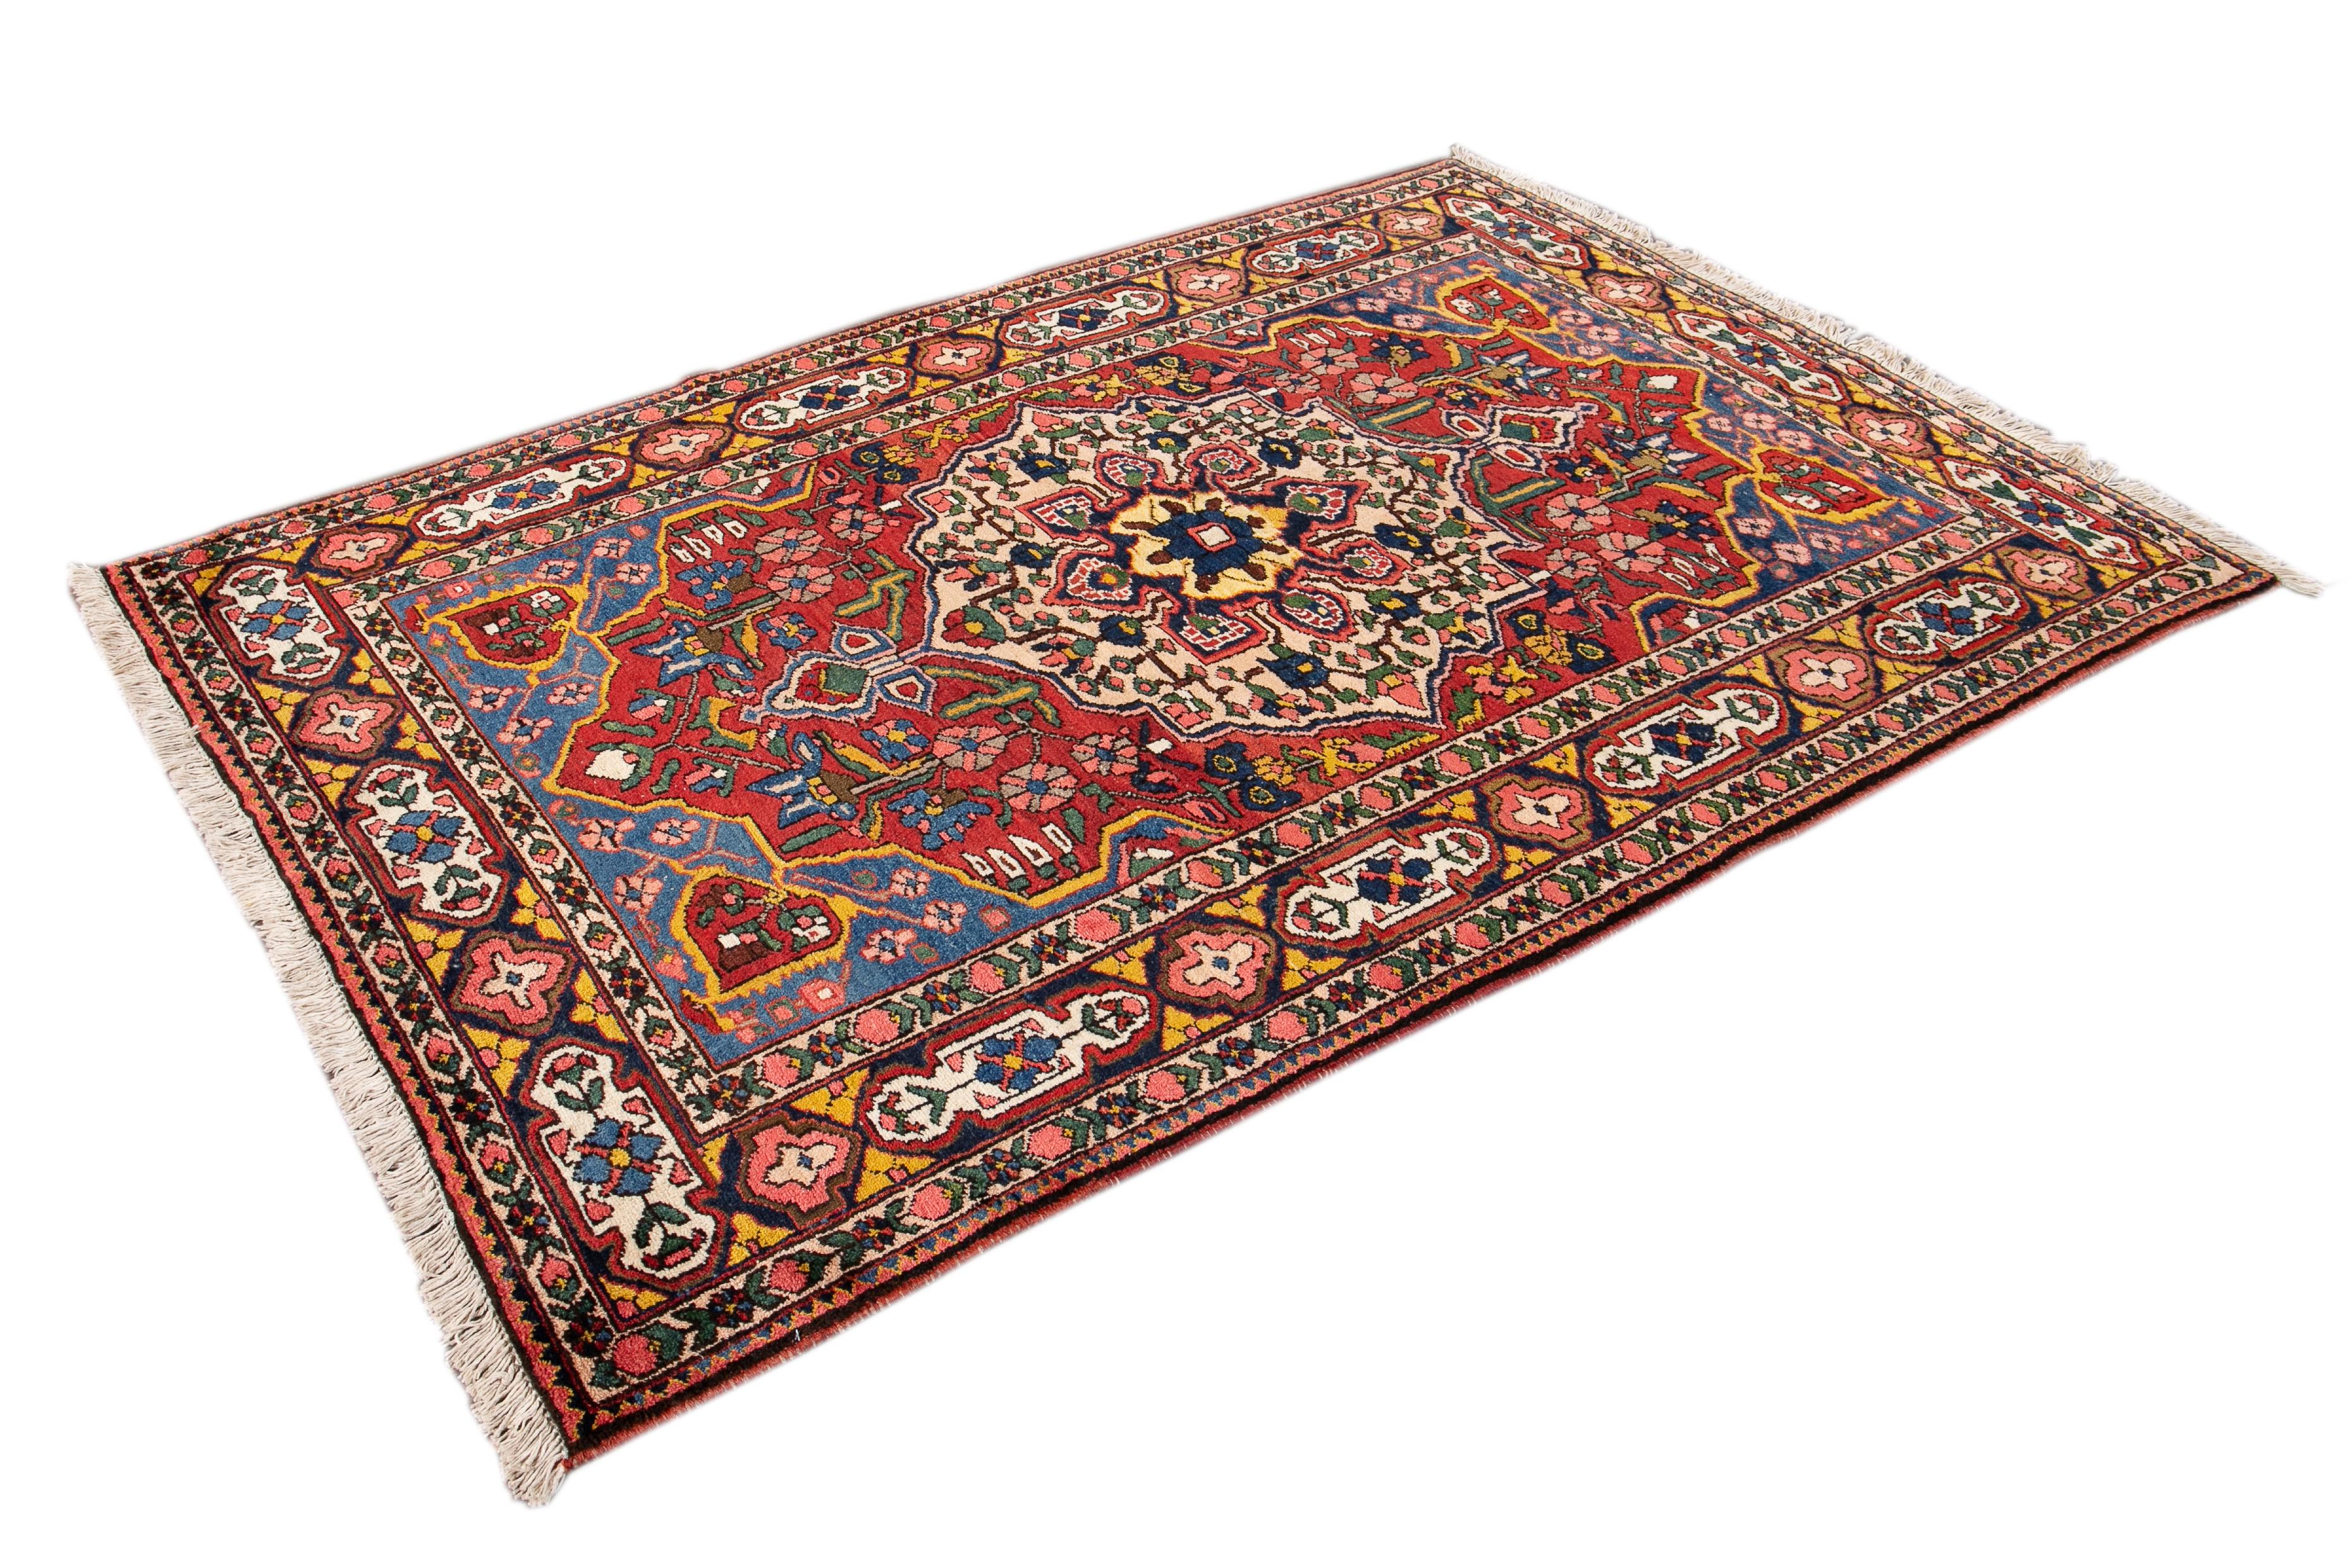 Early 20th Century Antique Bakhtiari Wool Rug In Good Condition For Sale In Norwalk, CT